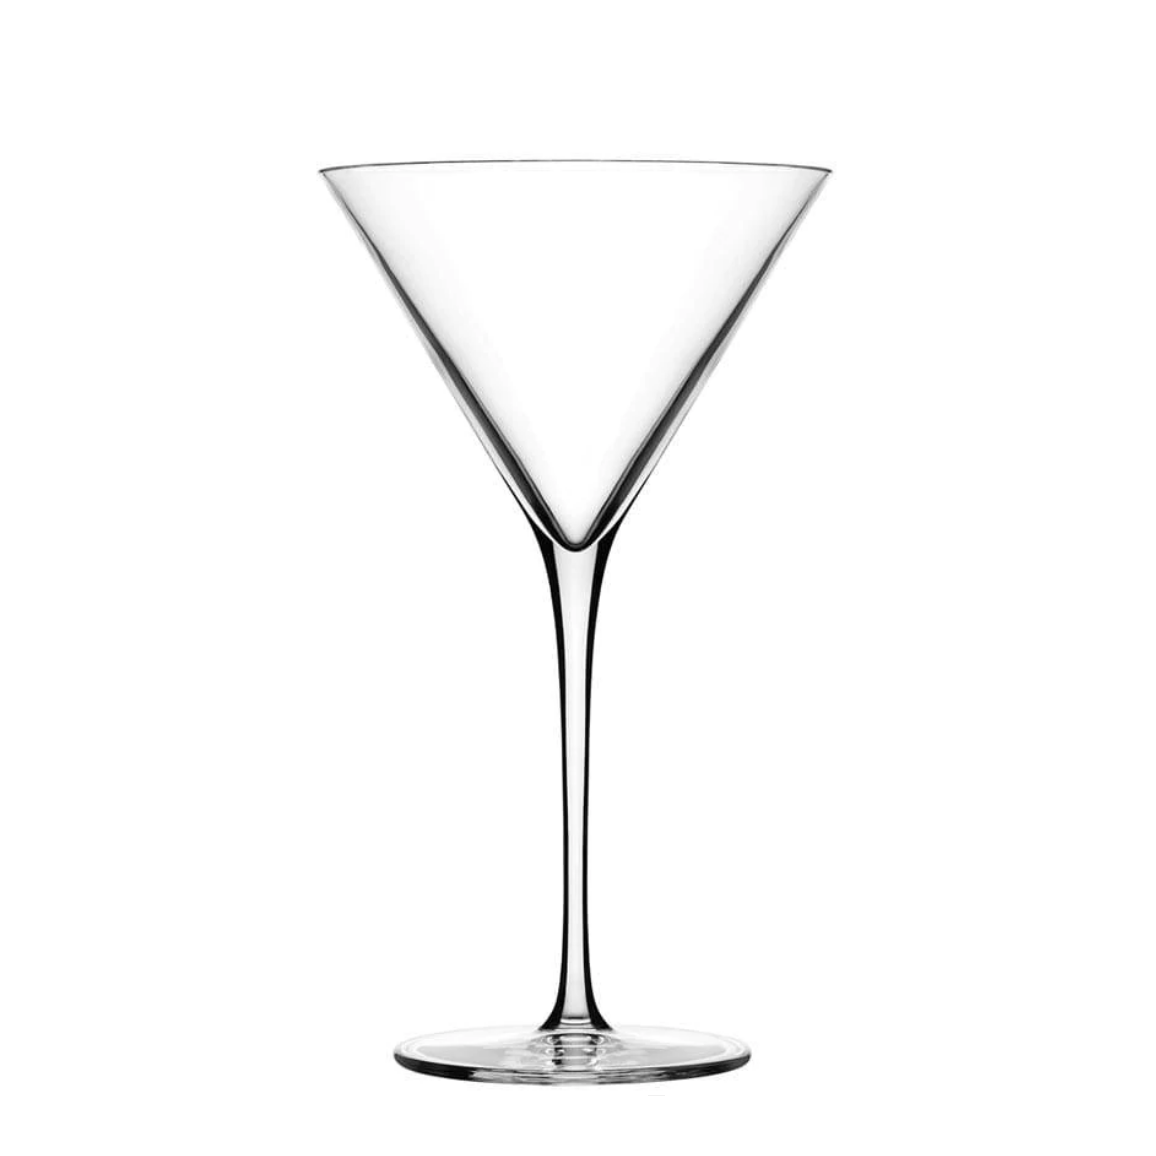 541 Martini Glasses - Party Rentals NYC